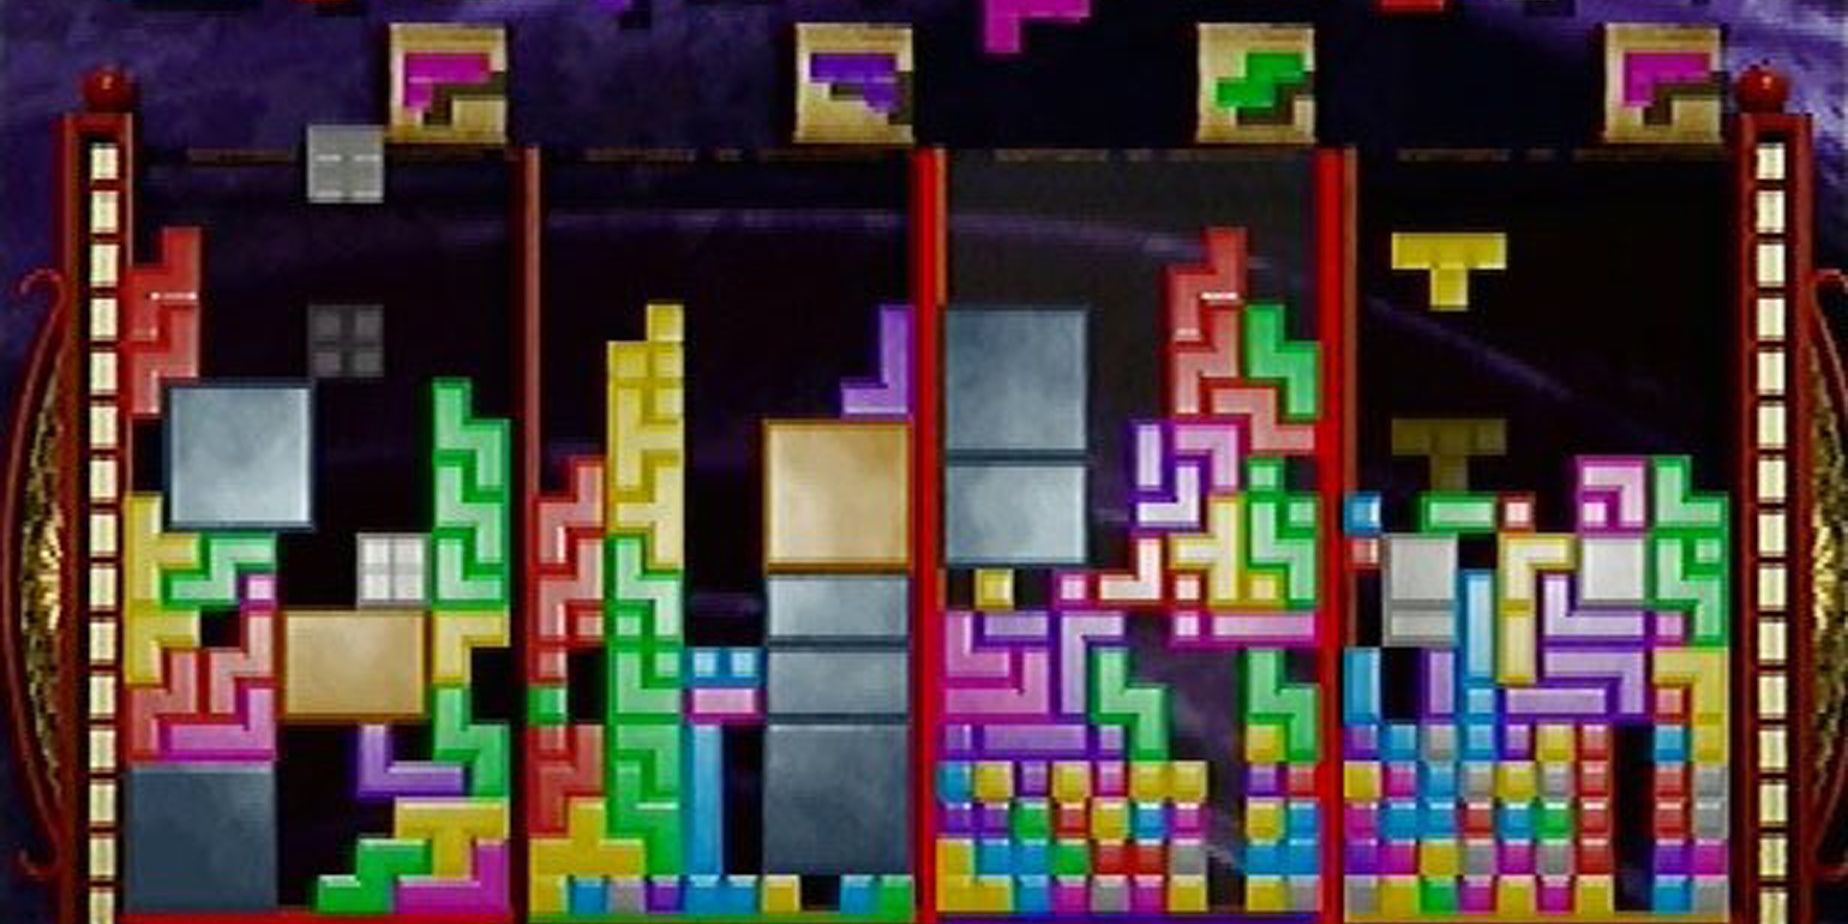 An image of actual gameplay from The New Tetris